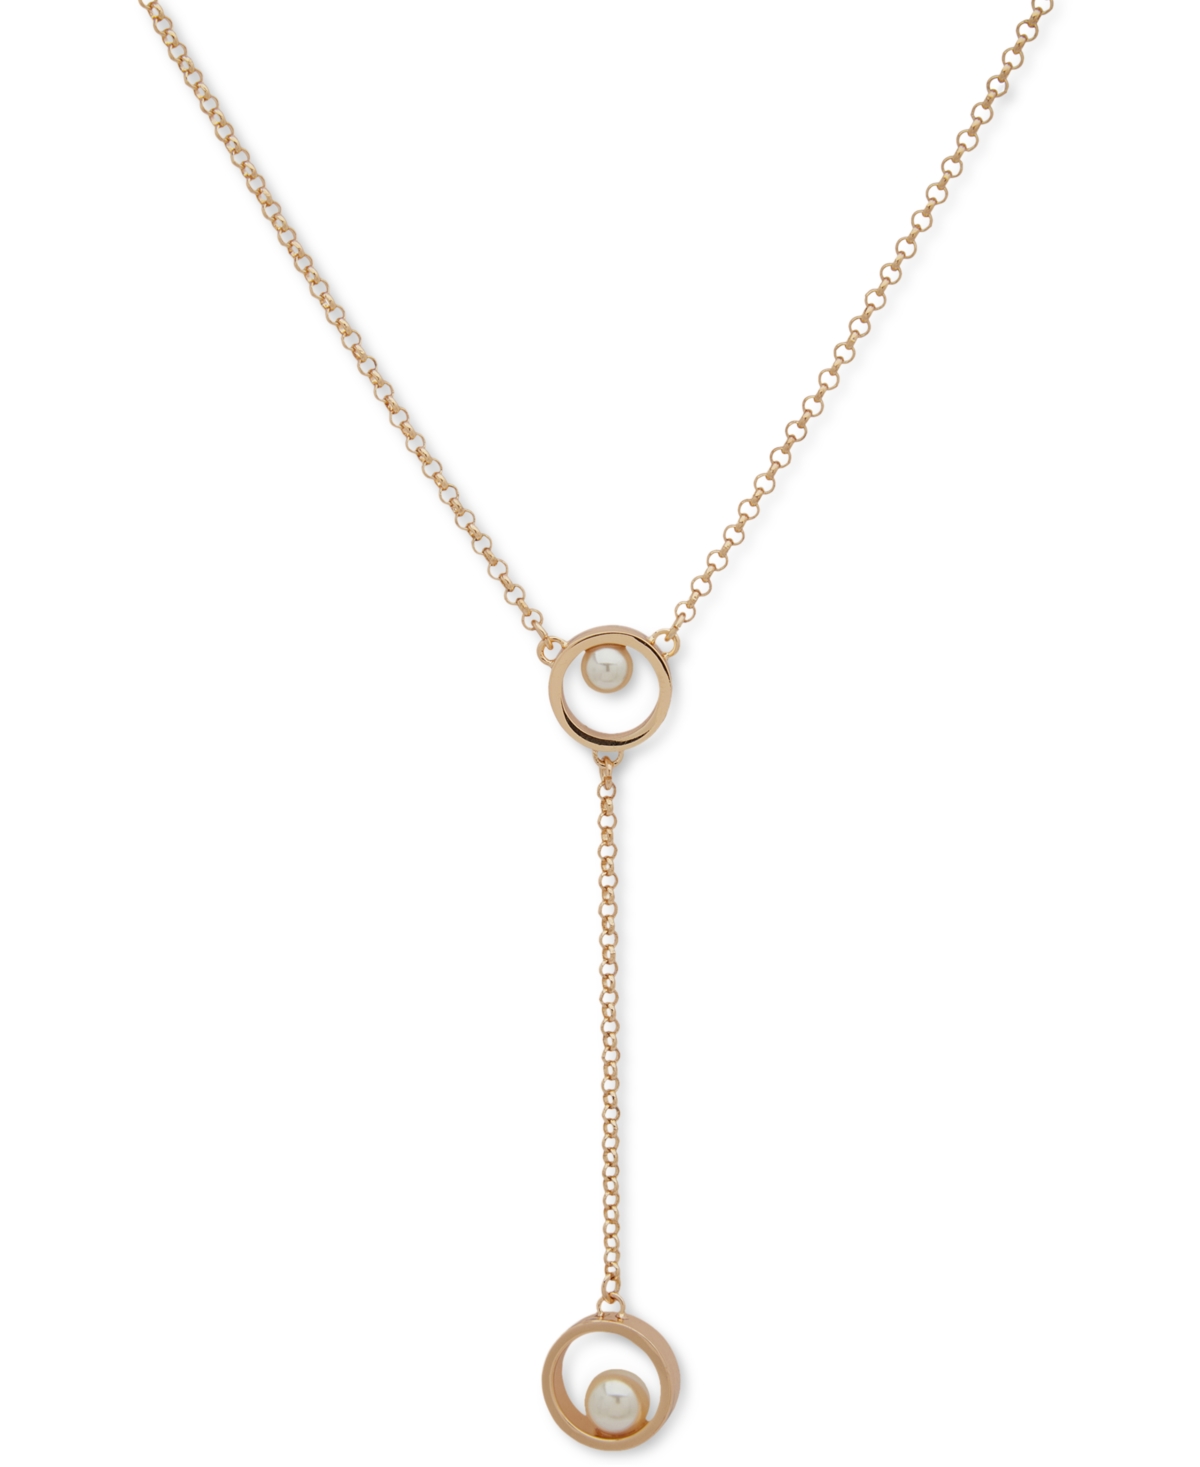 Karl Lagerfeld Gold-tone Imitation Pearl Lariat Necklace, 16" + 3" Extender